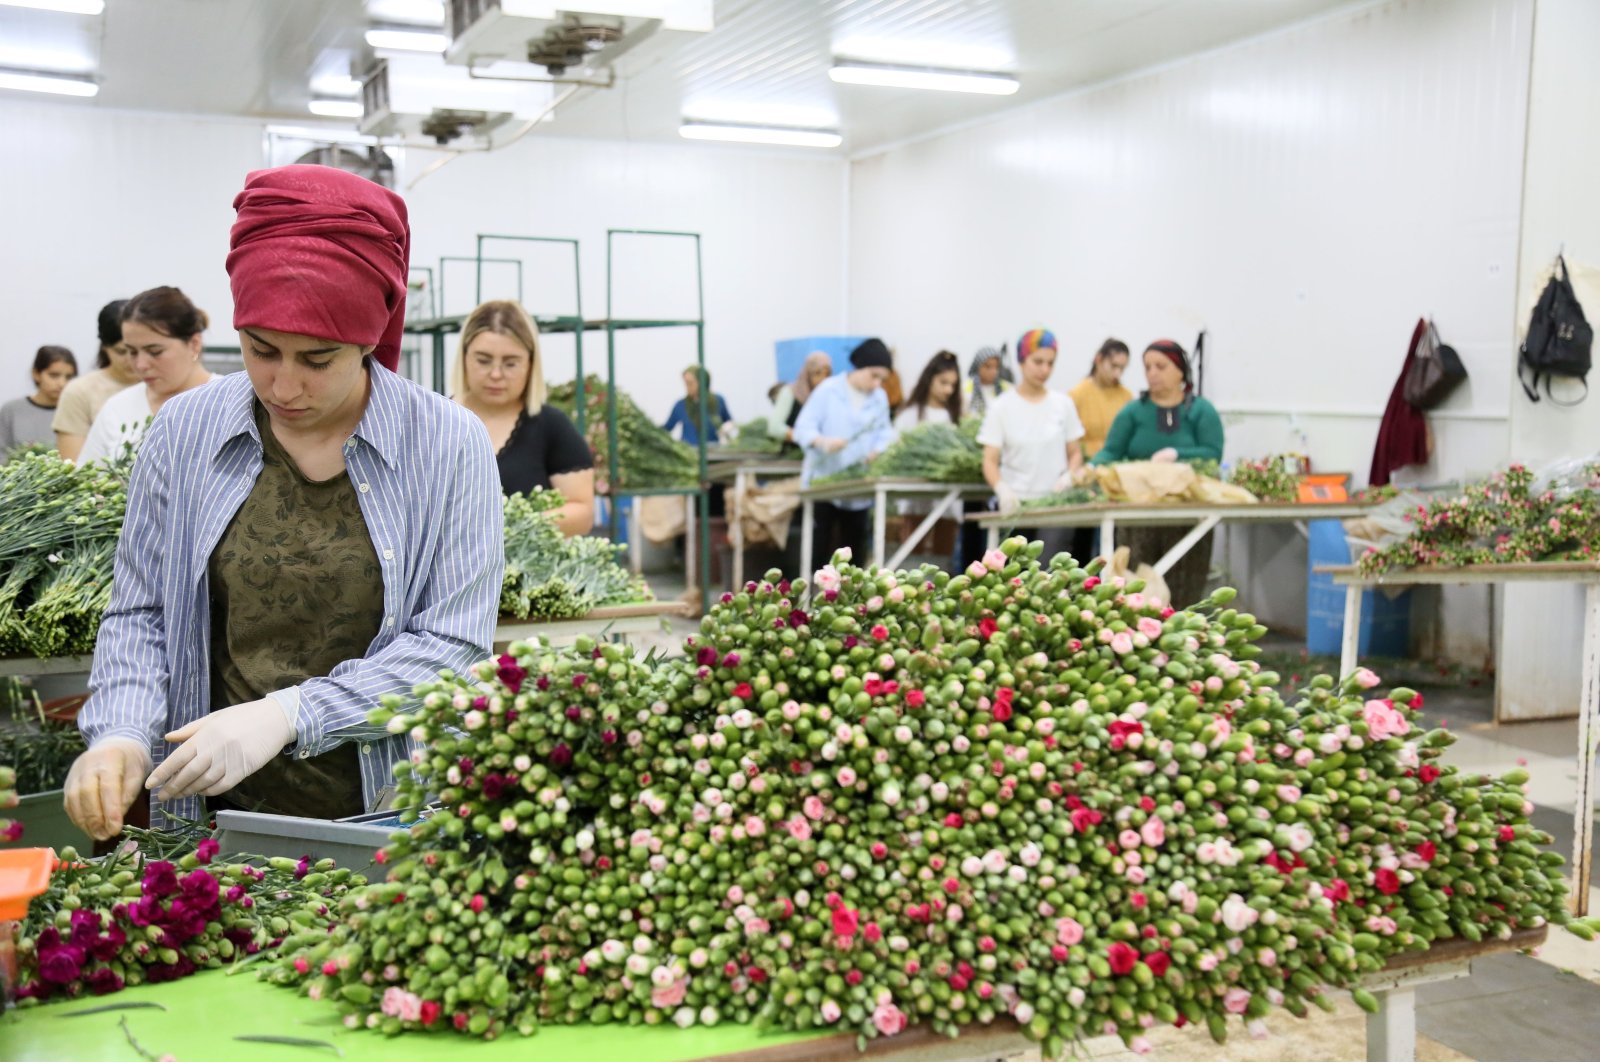 Workers are seen preparing carnations for shipments at a firm in Antalya, southern Türkiye, Sept. 10, 2022. (DHA Photo)